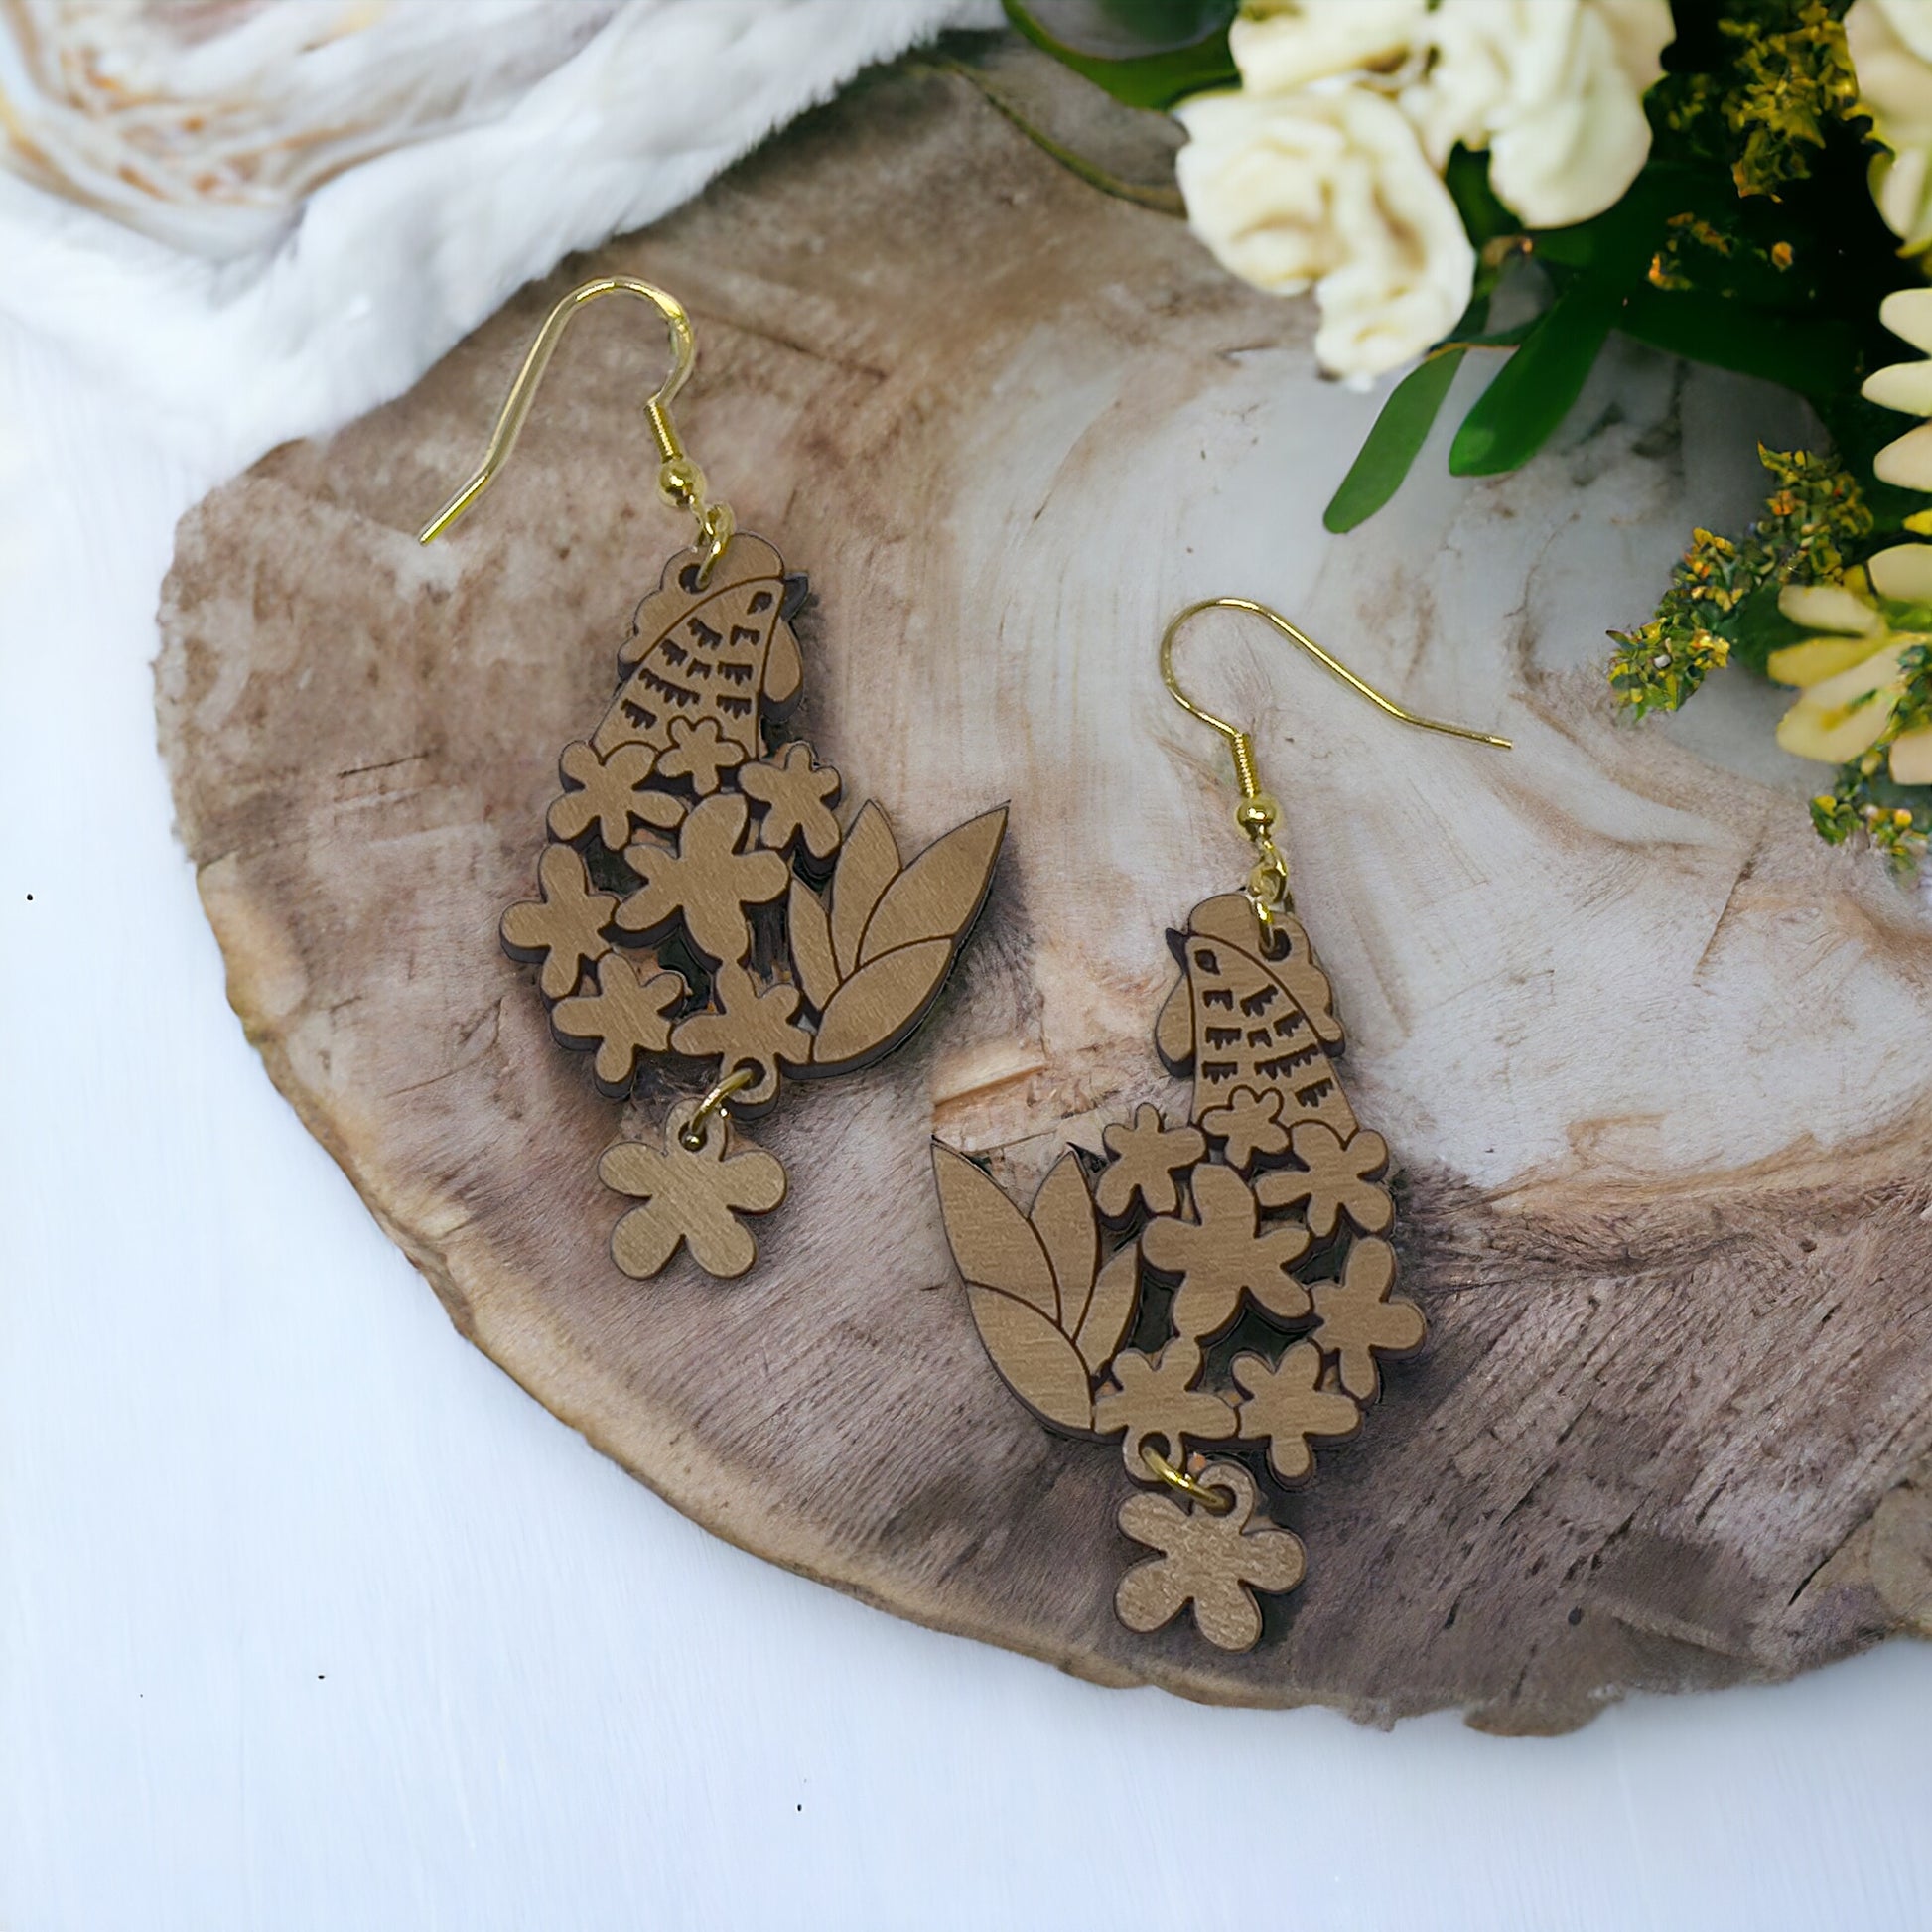 Chic Chick & Floral Wood Earrings: Handmade Rustic Jewelry for Nature Lovers